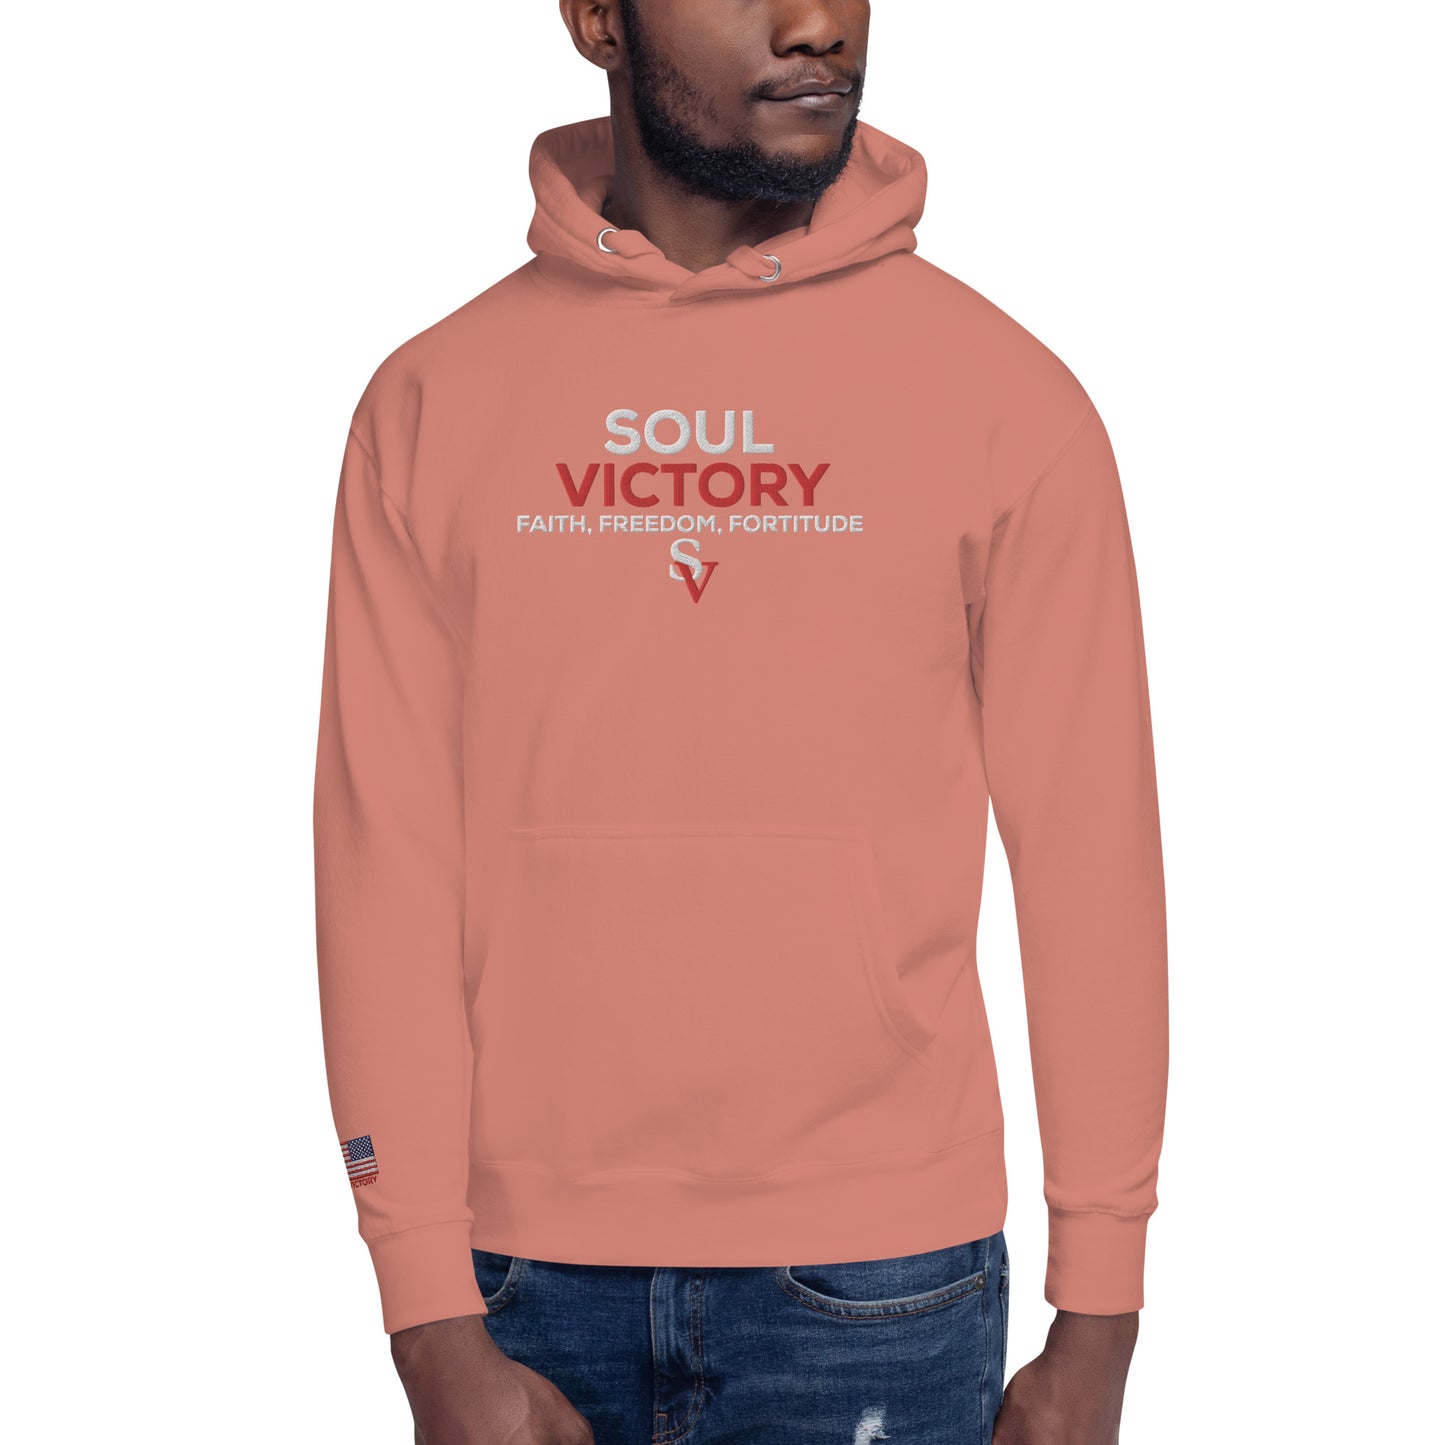 Men's 3F's Embroidered Hoodie